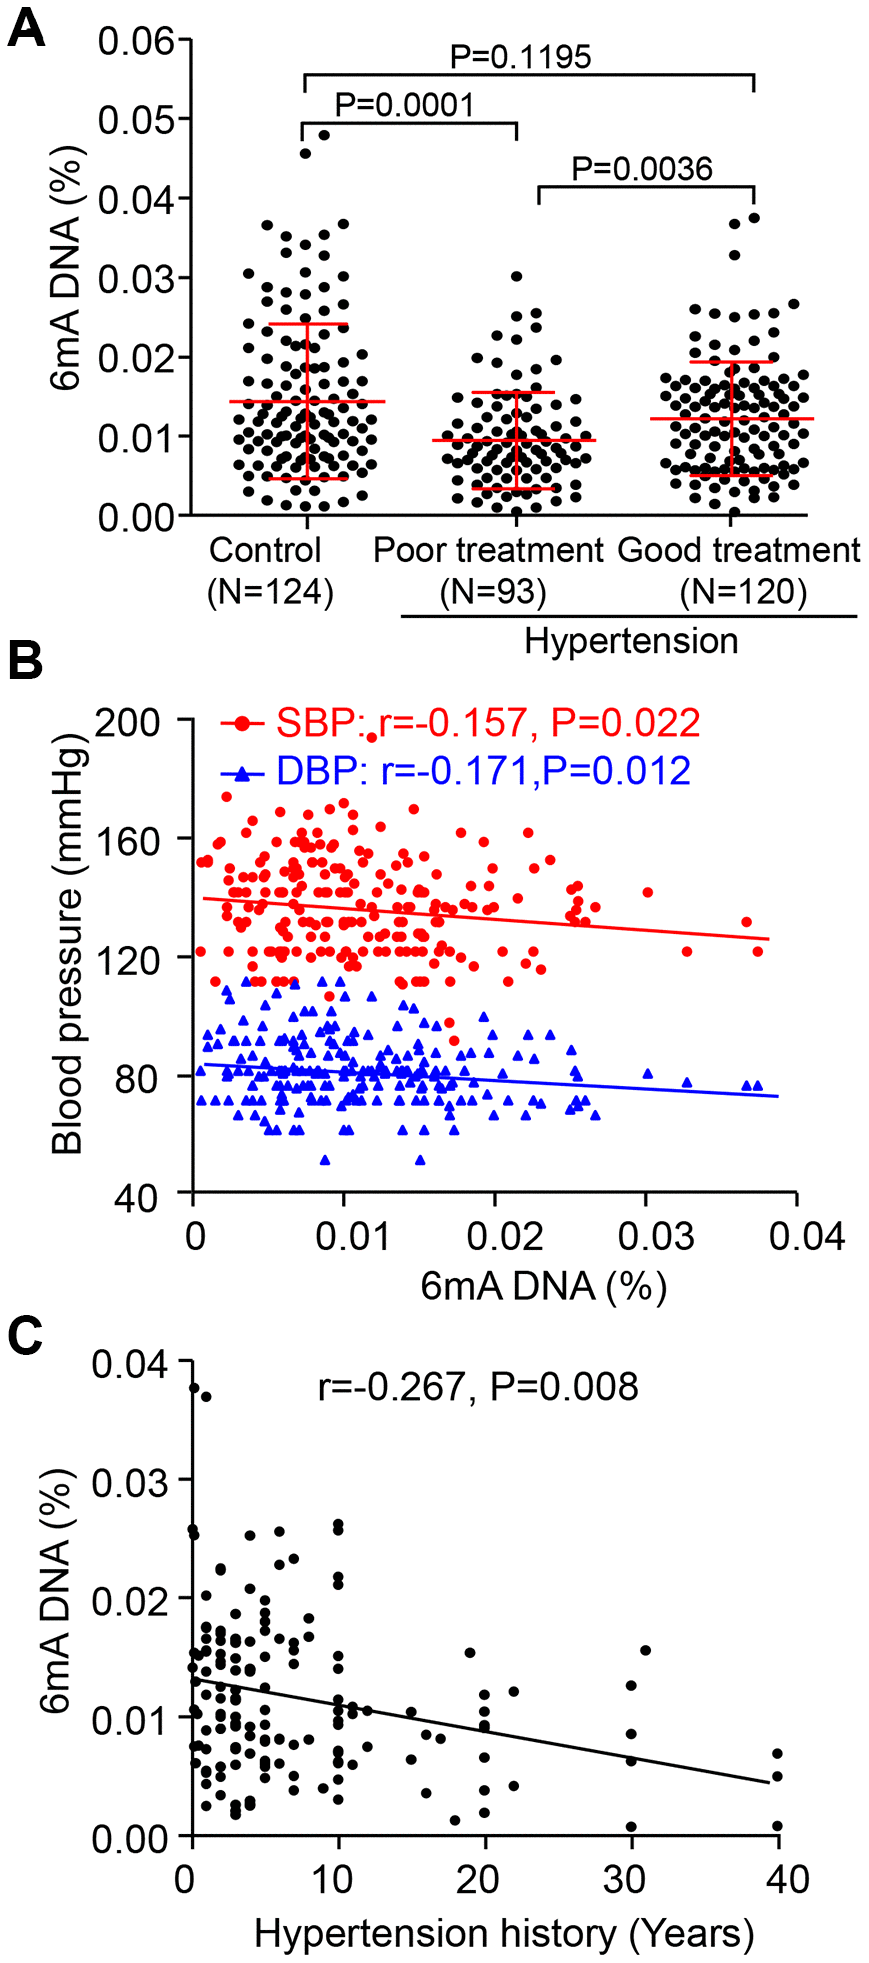 Decreased leukocyte N6-methyladenosine (6mA) DNA level is associated with hypertension development and treatment. (A) Overall leukocyte 6mA level in people with hypertension by drug treatment successful (Good) or not (Poor), as well as in the normal individuals (Control). (B, C) Spearman correlation coefficients for leukocyte 6mA level correlated with systolic blood pressure (SBP) and diastolic blood pressure (DBP), as well as hypertension history. Data are mean ± SD and were compared by unpaired t test for A and B.